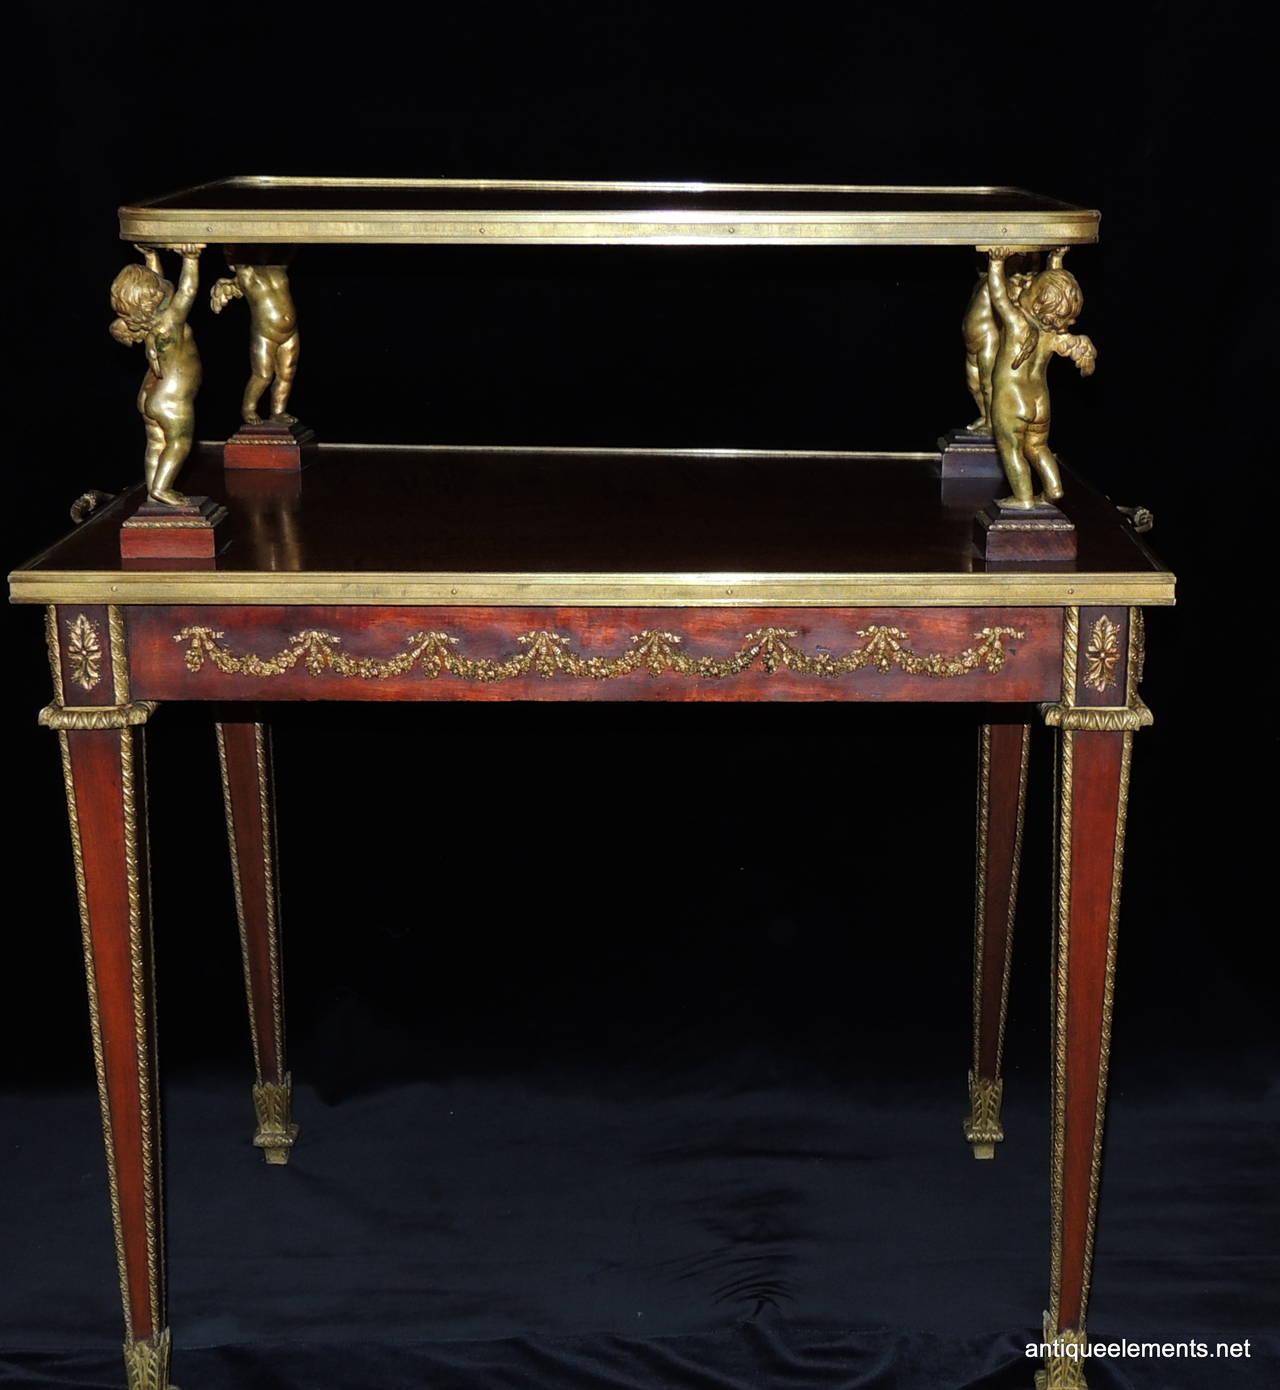 Belle Époque Exceptional Two Tier French Dore Bronze Ormolu Mounted Table Adorned W/ Cherub